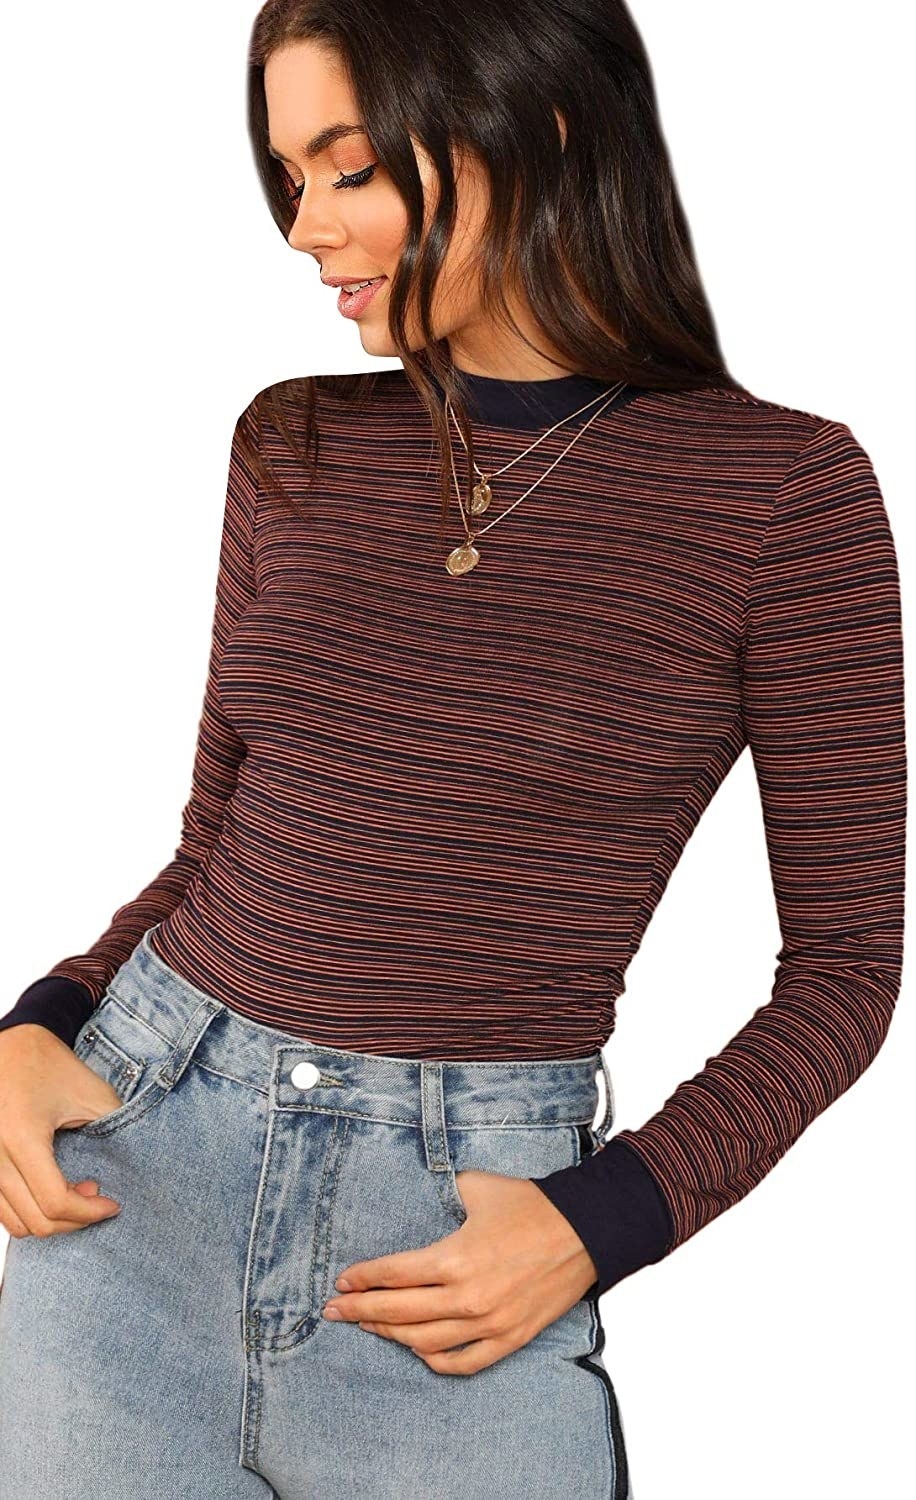 A model wearing the striped shirt